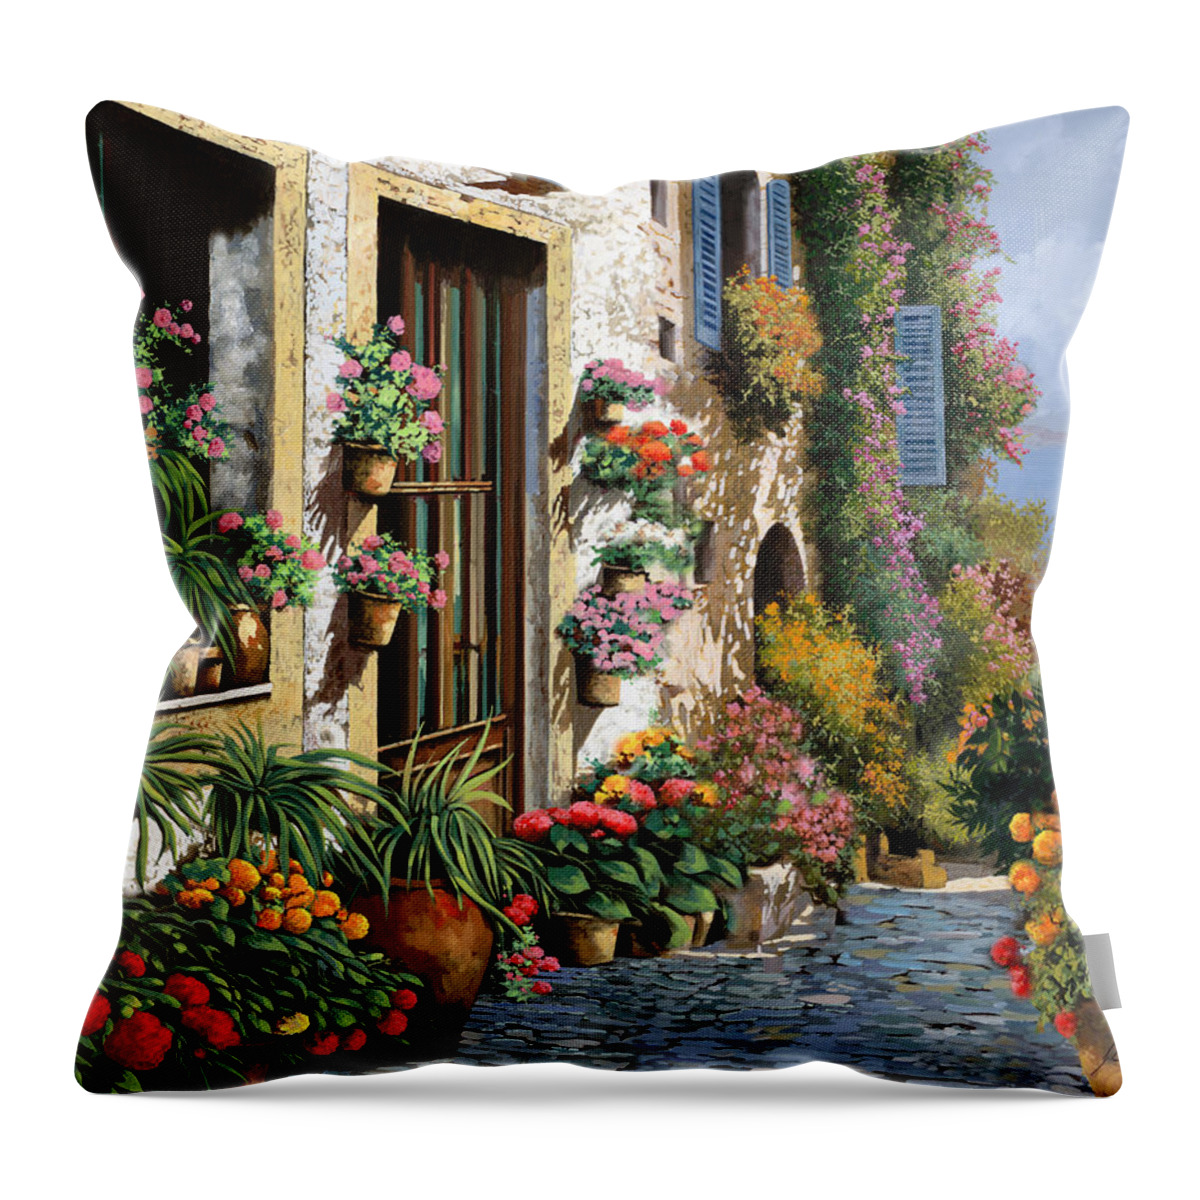 Seascape Throw Pillow featuring the painting La Strada Del Lago by Guido Borelli